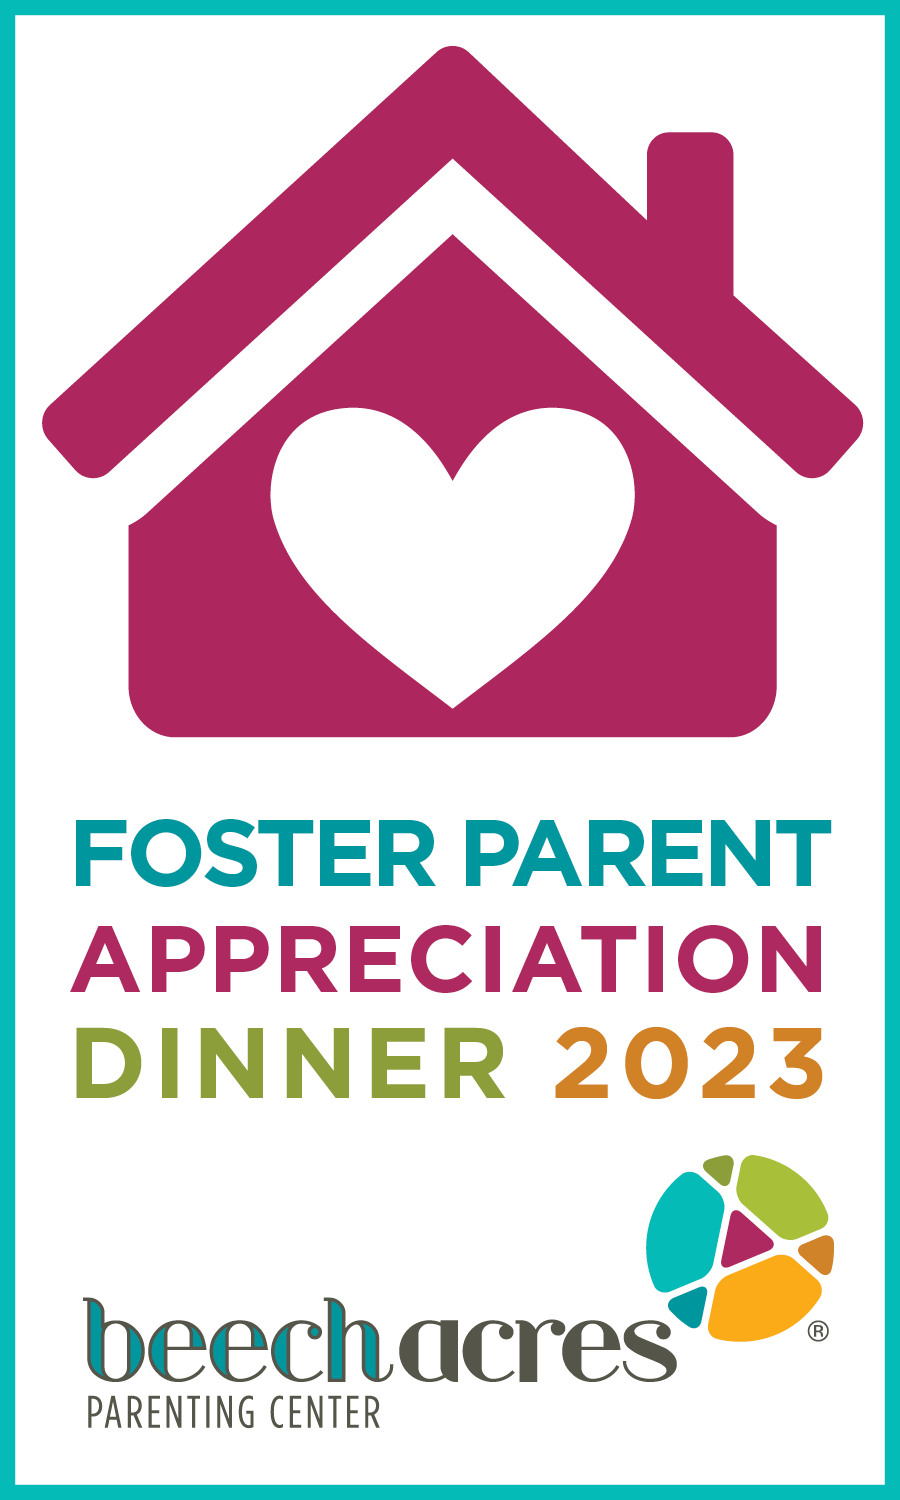 Foster Parent Appreciation Dinner Sponsorship Opportunities Available!